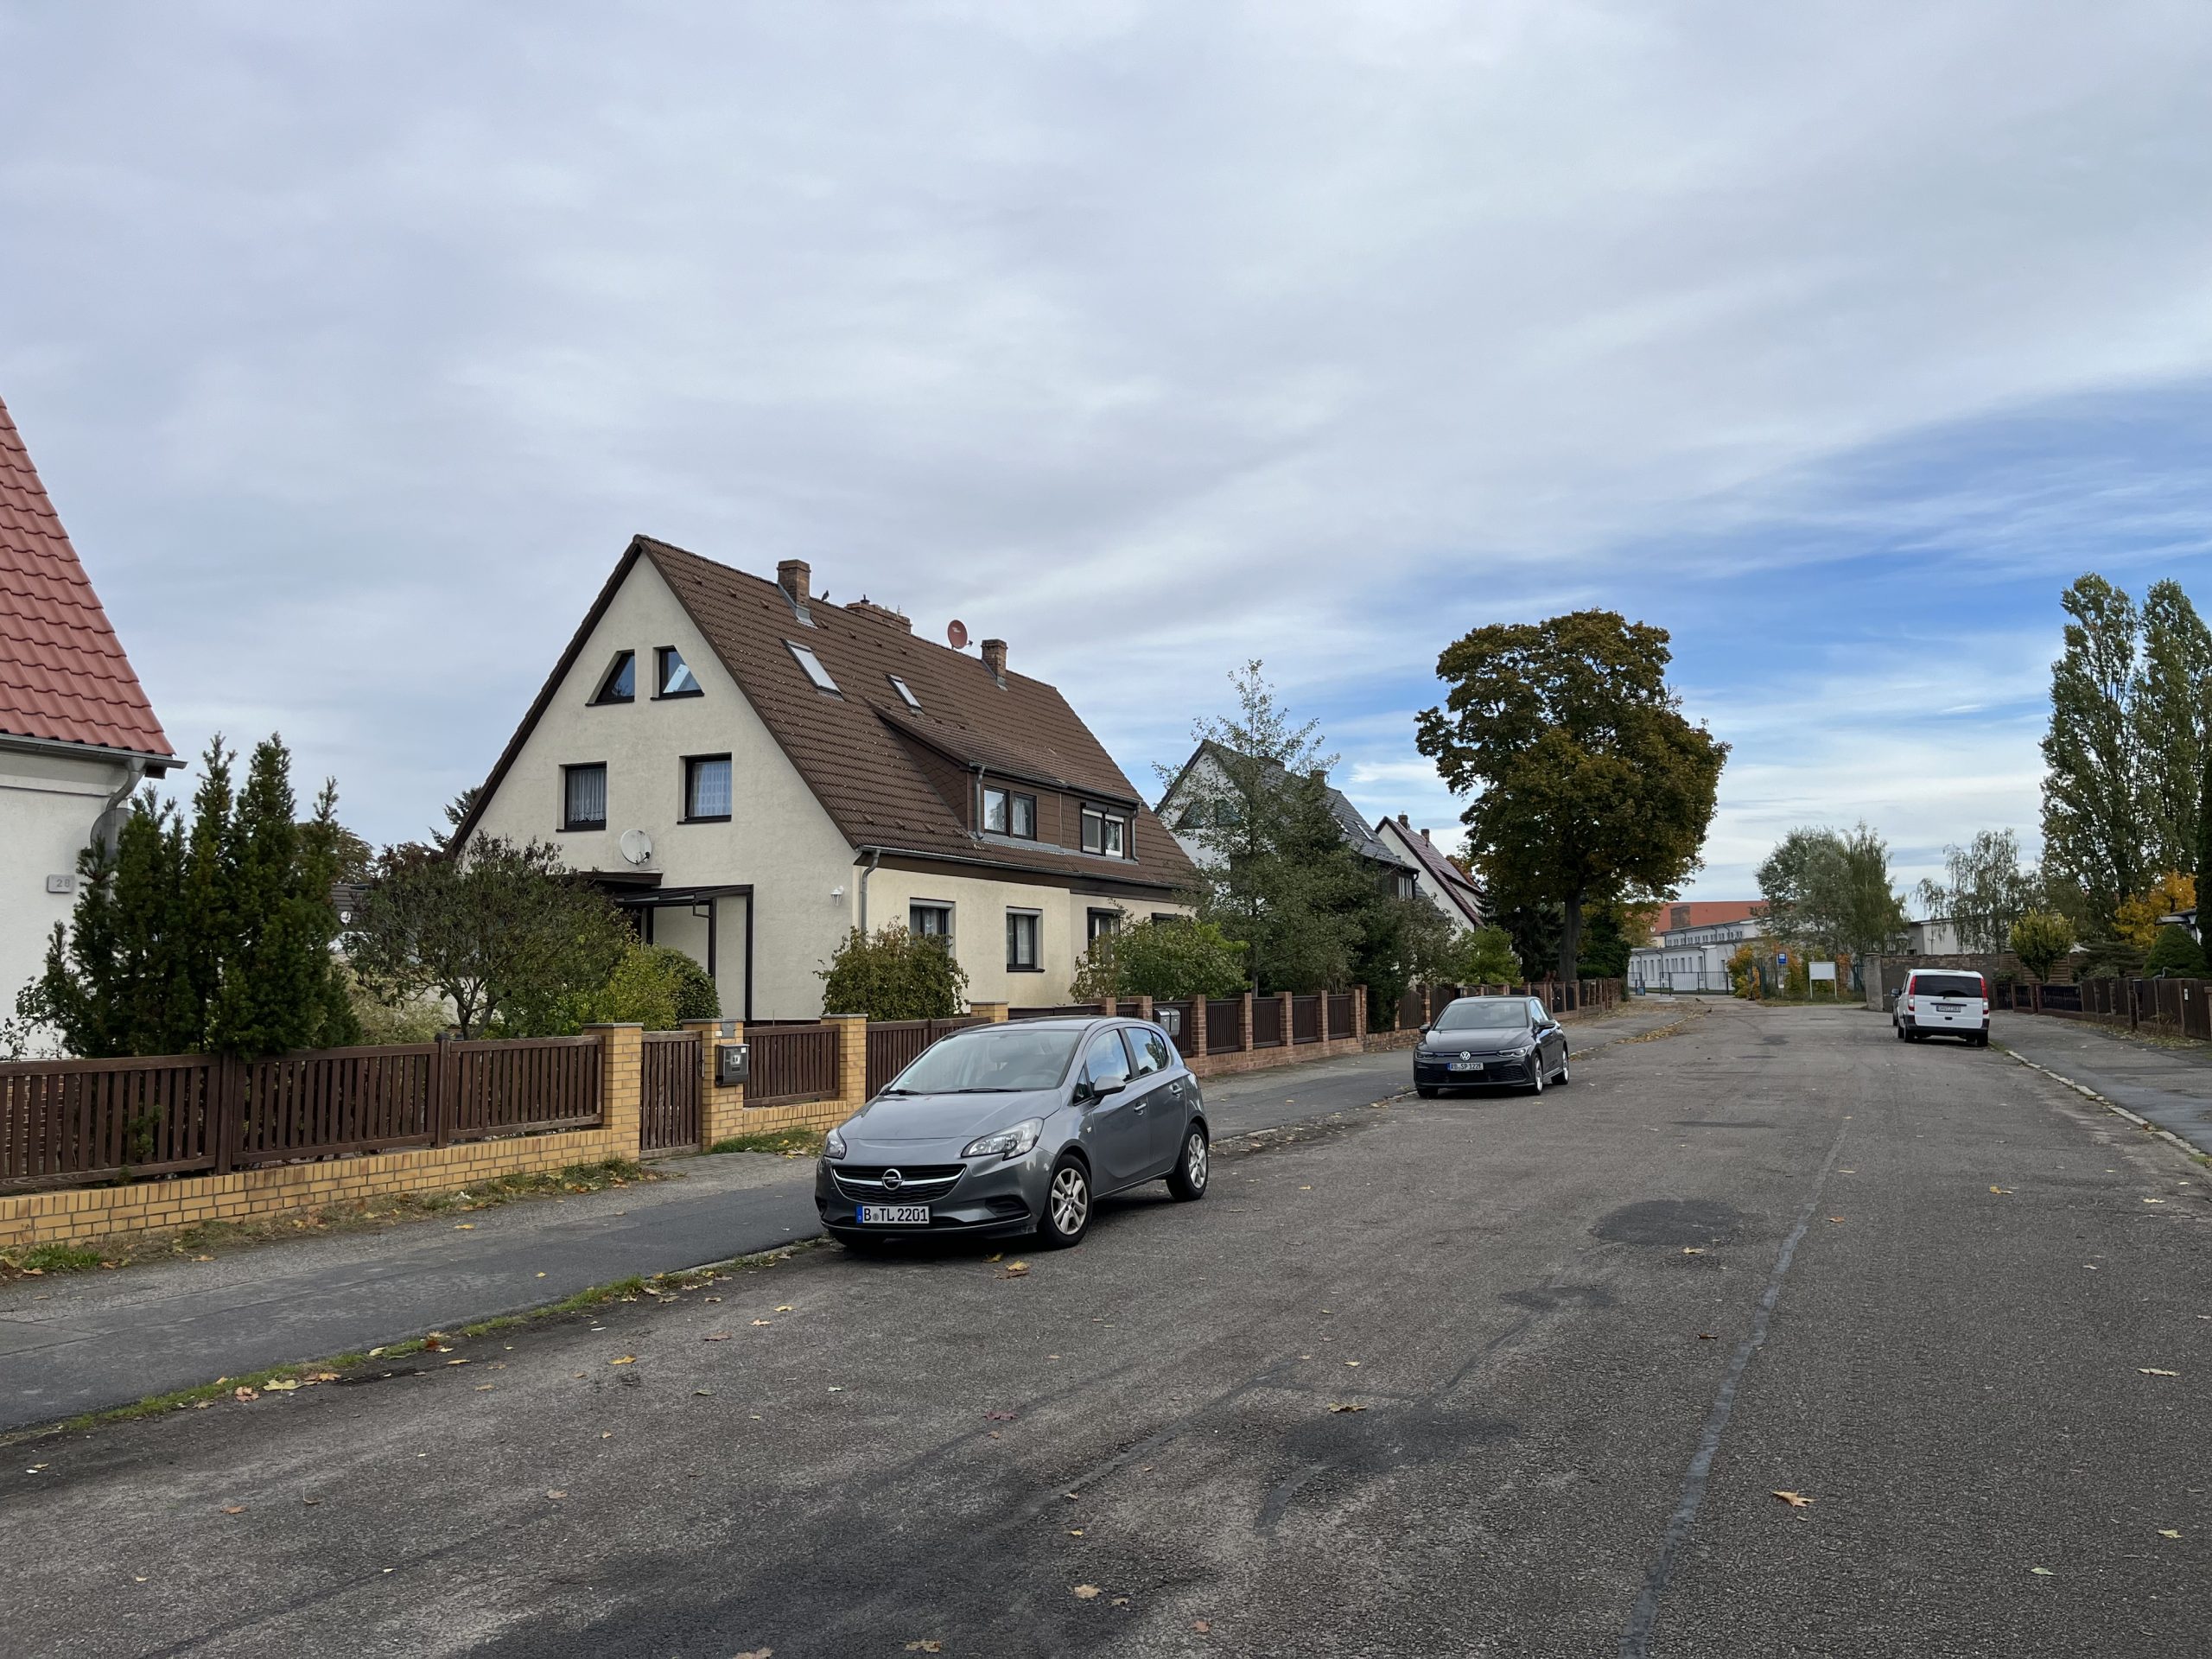 Hans-Von-Dohnanyi-Straße, Oranienburg. The entrance to the former Sachsenhausen Concentration Camp can be seen at the end of the street.